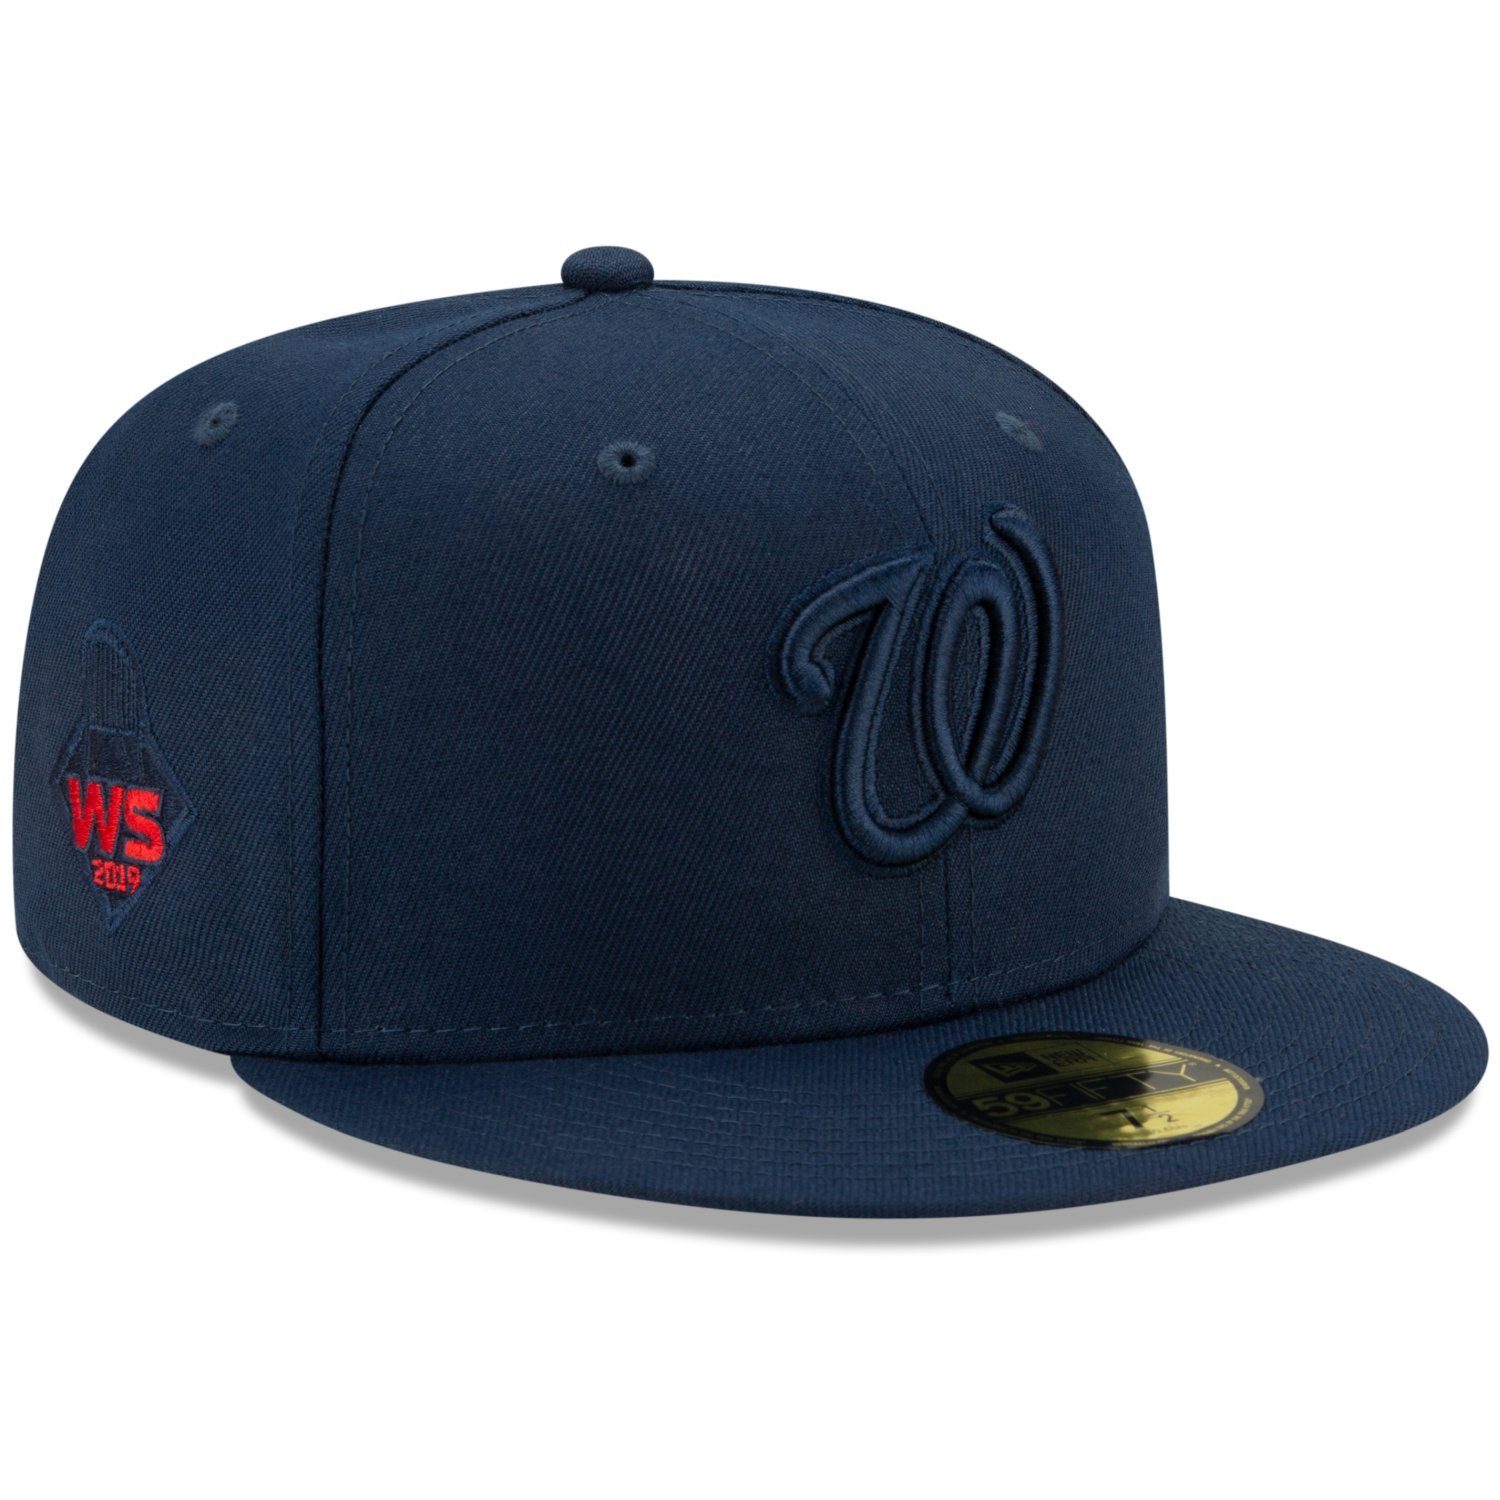 New Era Fitted Cap 59Fifty MLB WORLD SERIES Washington Nationals